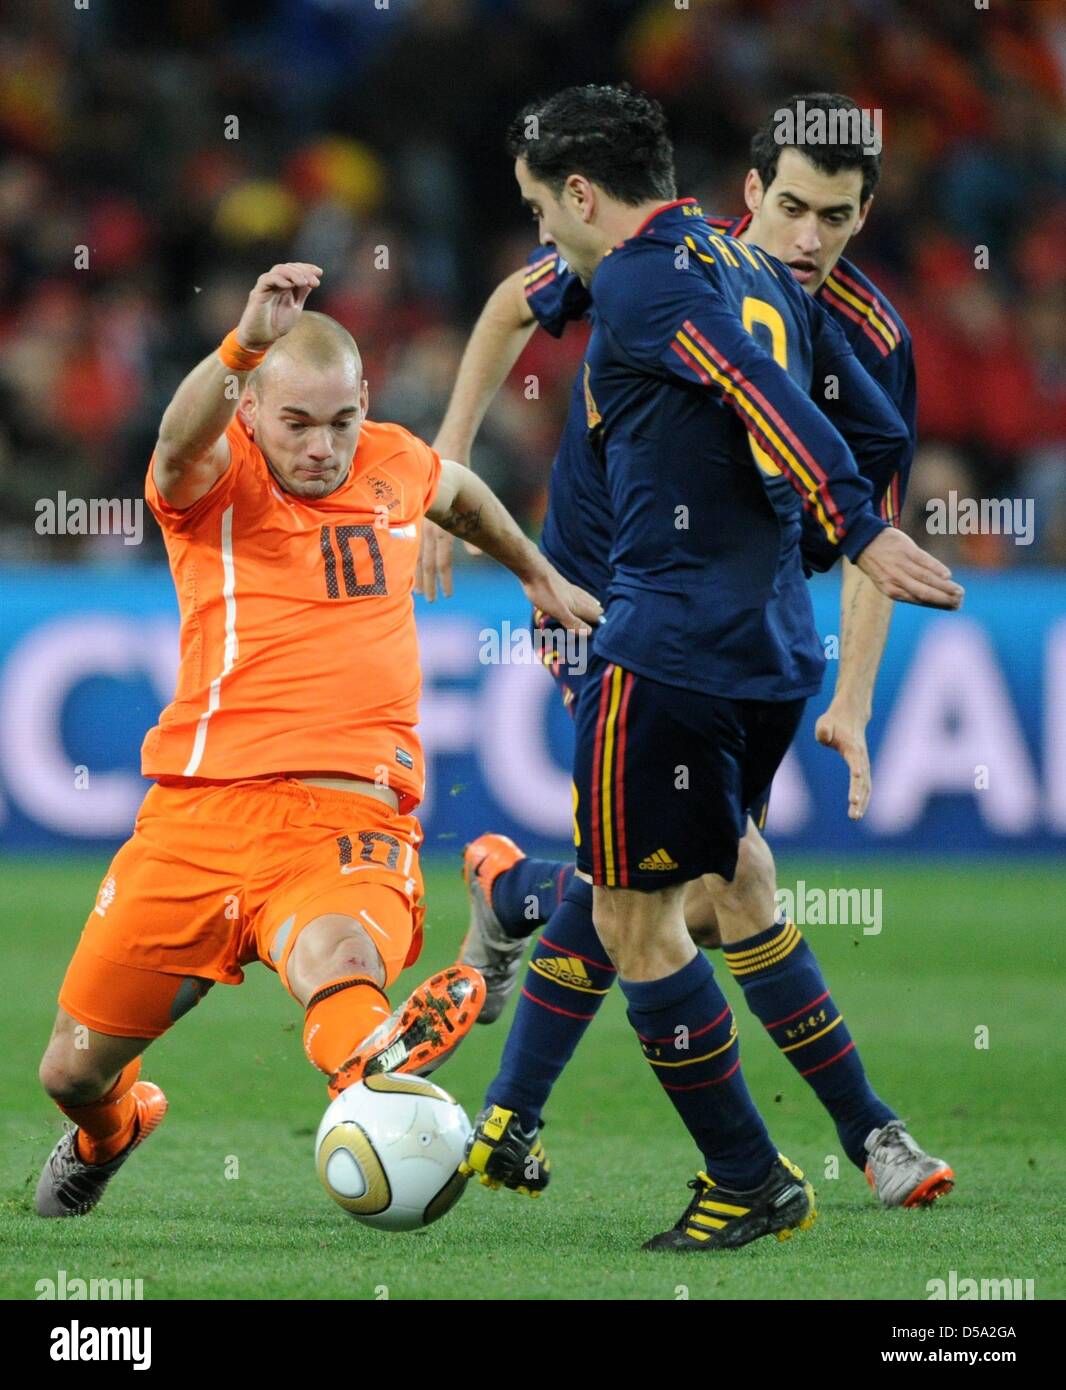 Dutch Wesley Sneijder (L) vies for the ball with Spain's Sergio Busquets (R) and Xavi during the 2010 FIFA World Cup final match between the Netherlands and Spain at Soccer City Stadium in Johannesburg, South Africa 11 July 2010. Photo: Marcus Brandt dpa - Please refer to http://dpaq.de/FIFA-WM2010-TC Stock Photo